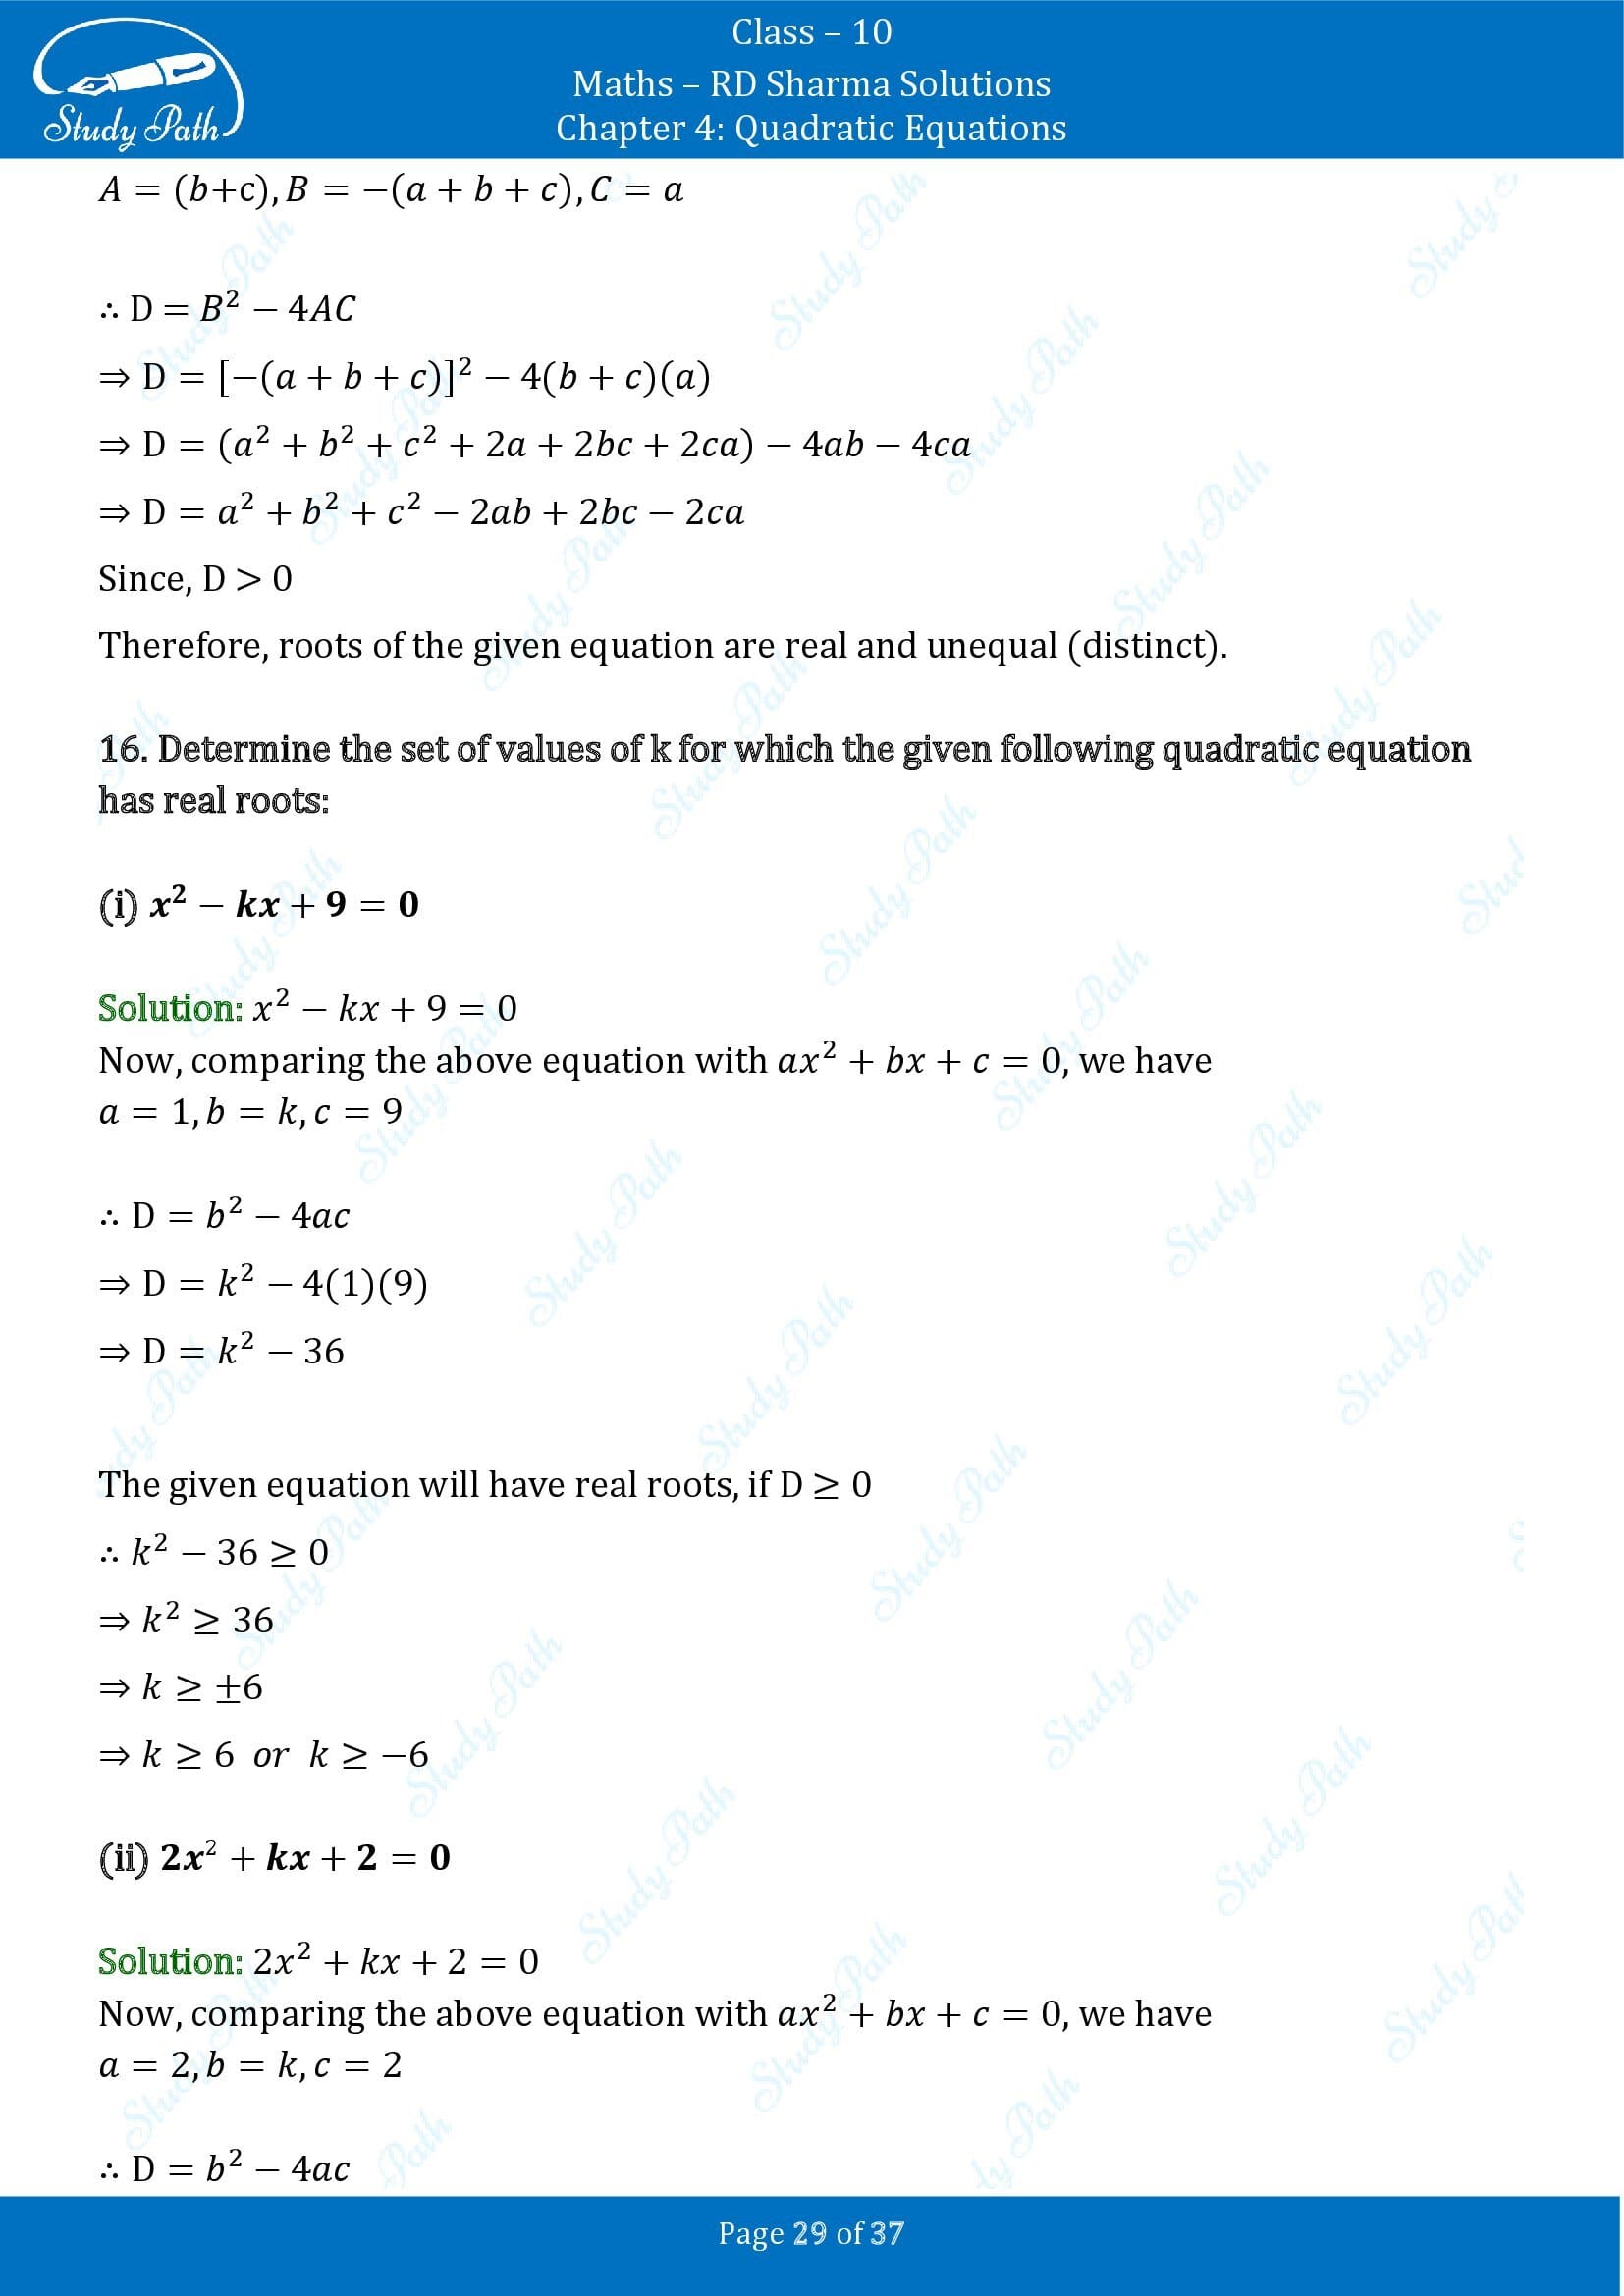 RD Sharma Solutions Class 10 Chapter 4 Quadratic Equations Exercise 4.6 00029